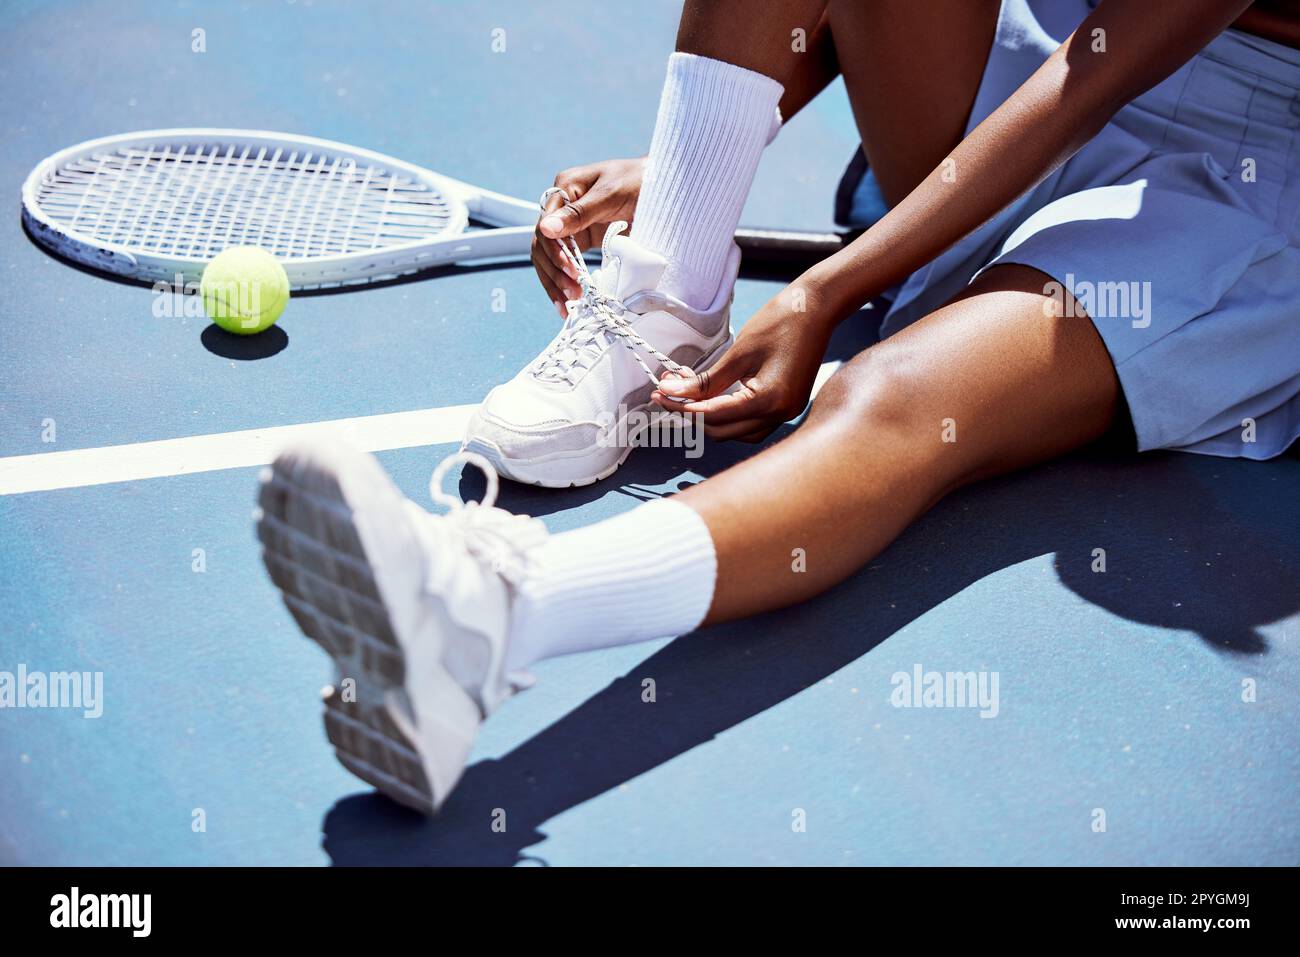 Tennis player woman, shoelace and ready for game, training or exercise sneakers in development, sports or focus. Sport expert, girl athlete and professional shoes with tennis ball, racket and goals Stock Photo